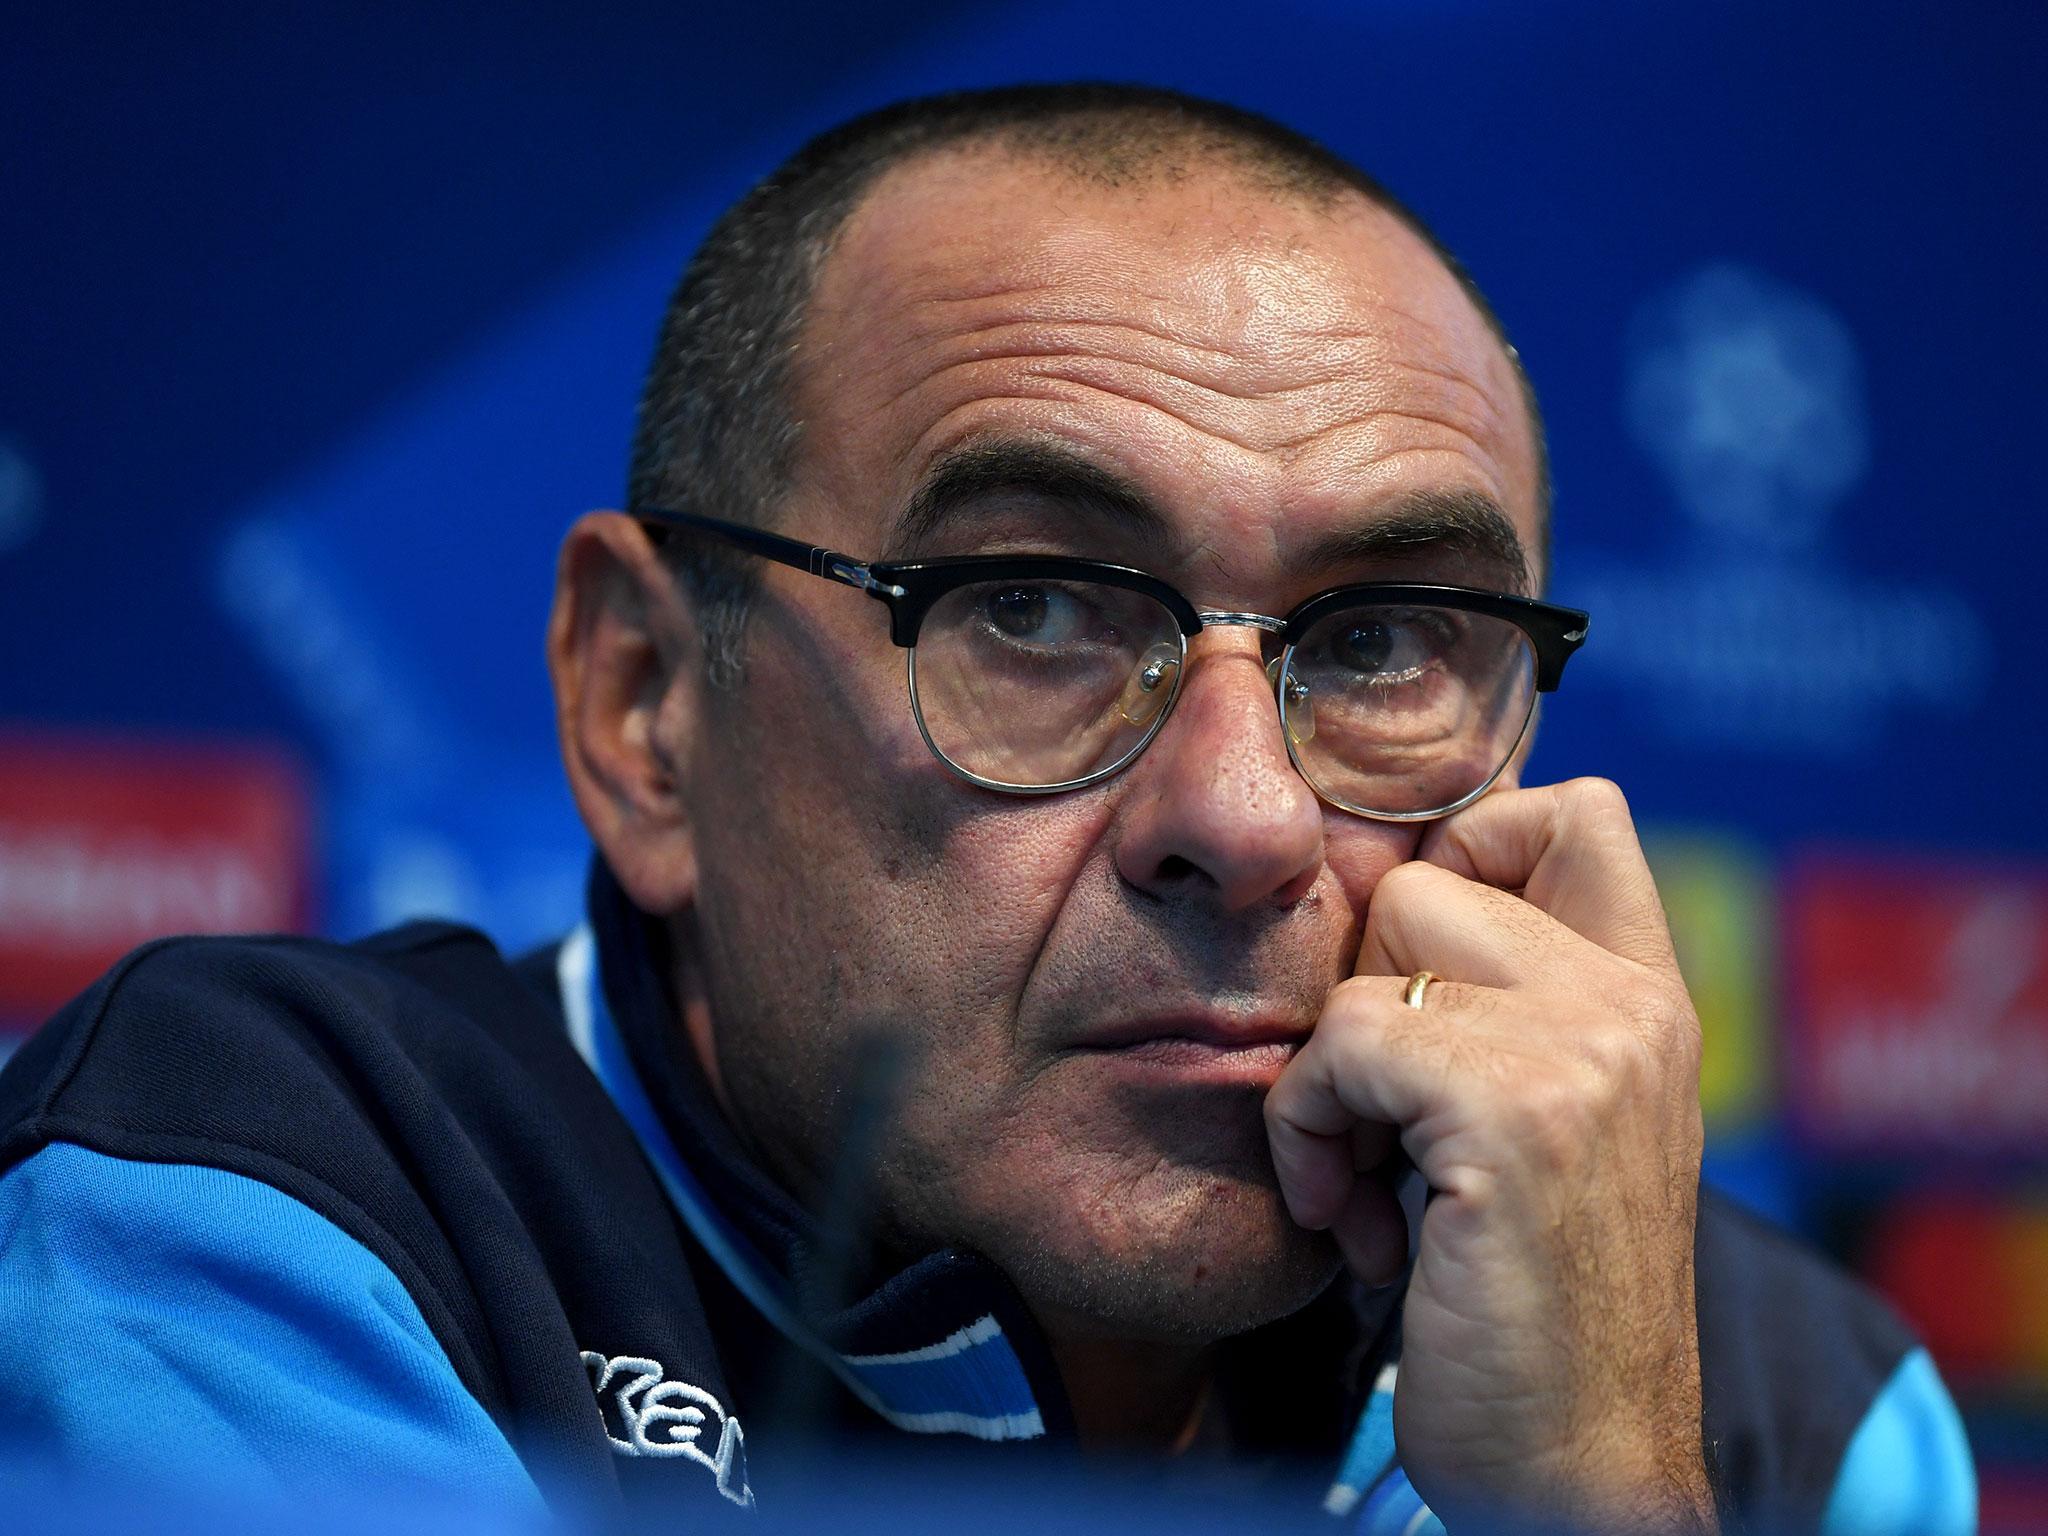 Sarri's Napoli haven't won either of their last two games, letting Juventus top the league